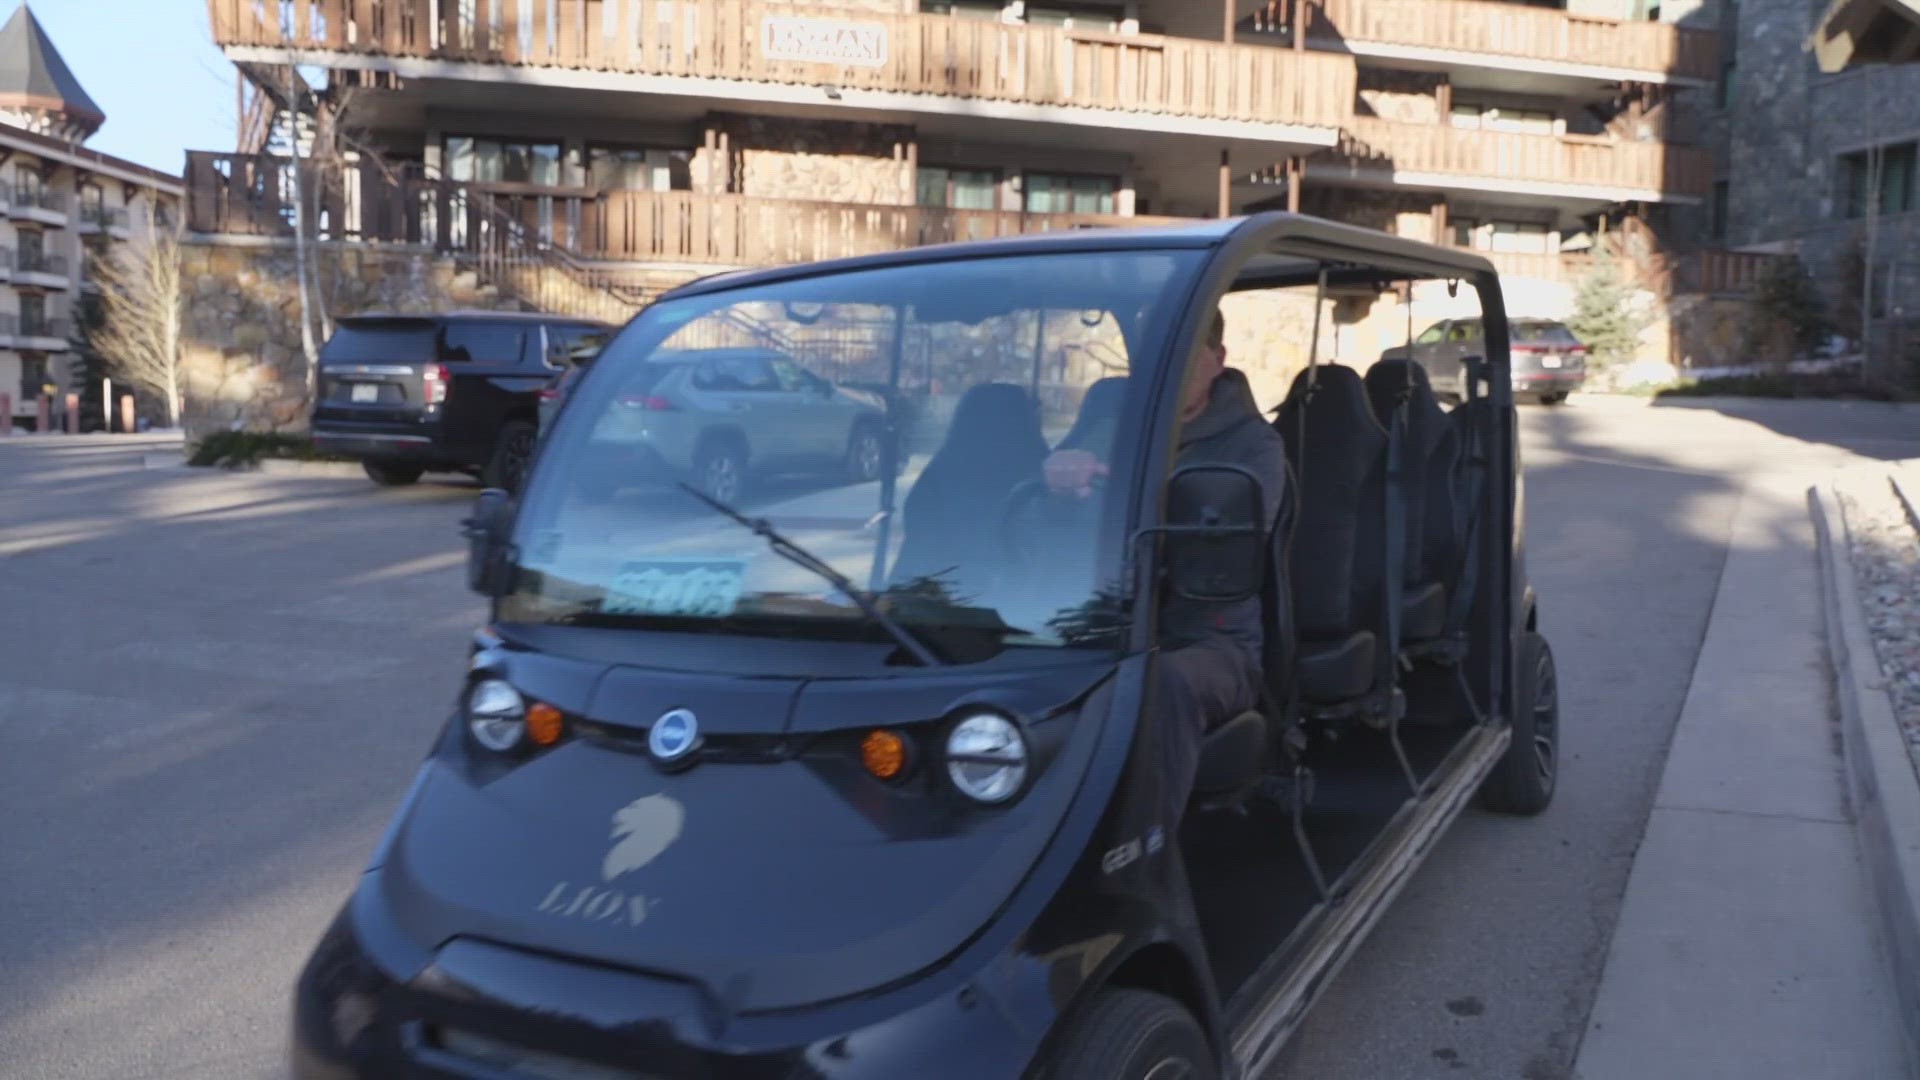 It seems only fitting that a ski town like Vail would have a stretched limo golf cart driving skiers and riders to the mountain.